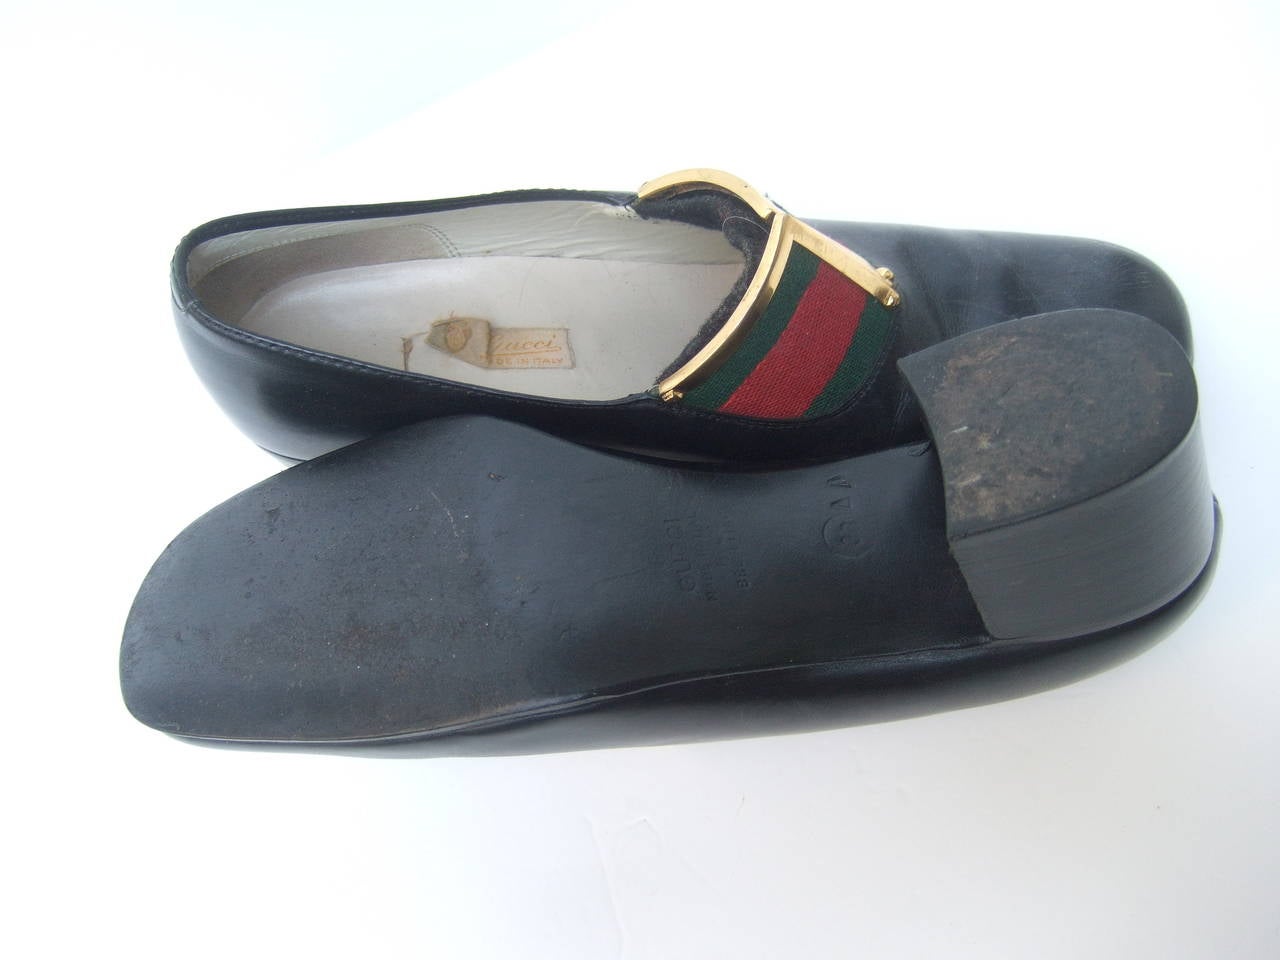 Gucci Italy Ebony Leather Striped Trim Shoes Size 38 AA c 1970 1